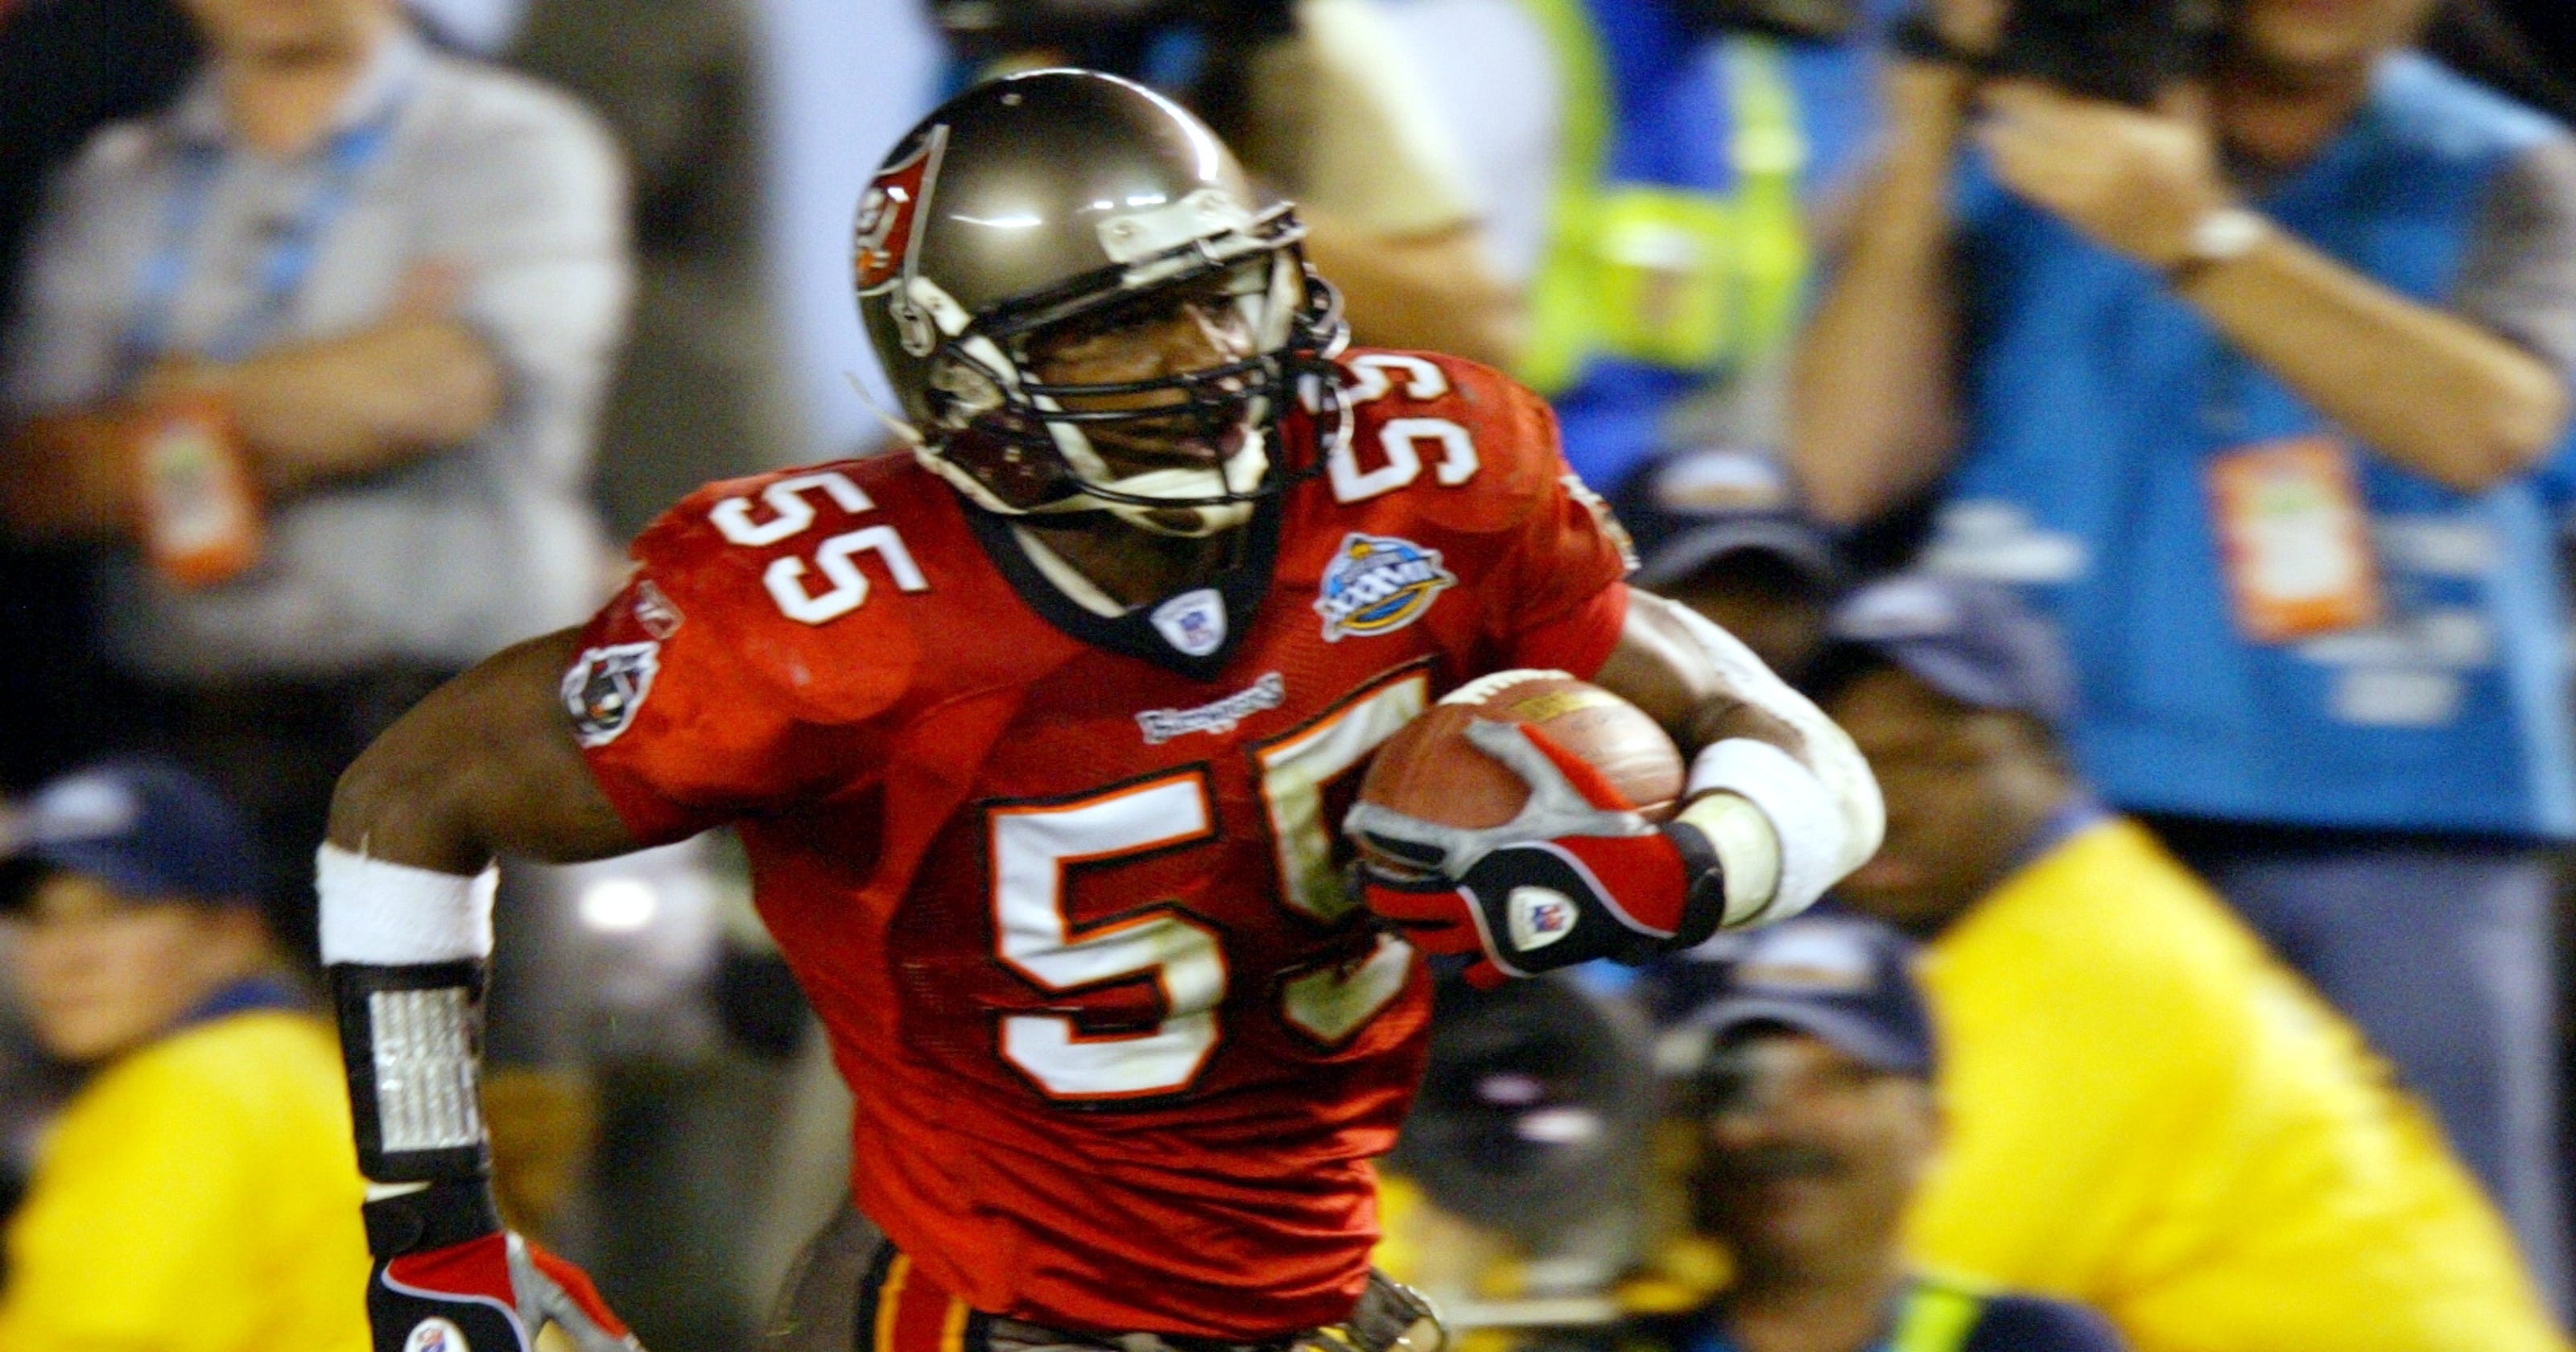 Predictions on 2014 Pro Football Hall of Fame class